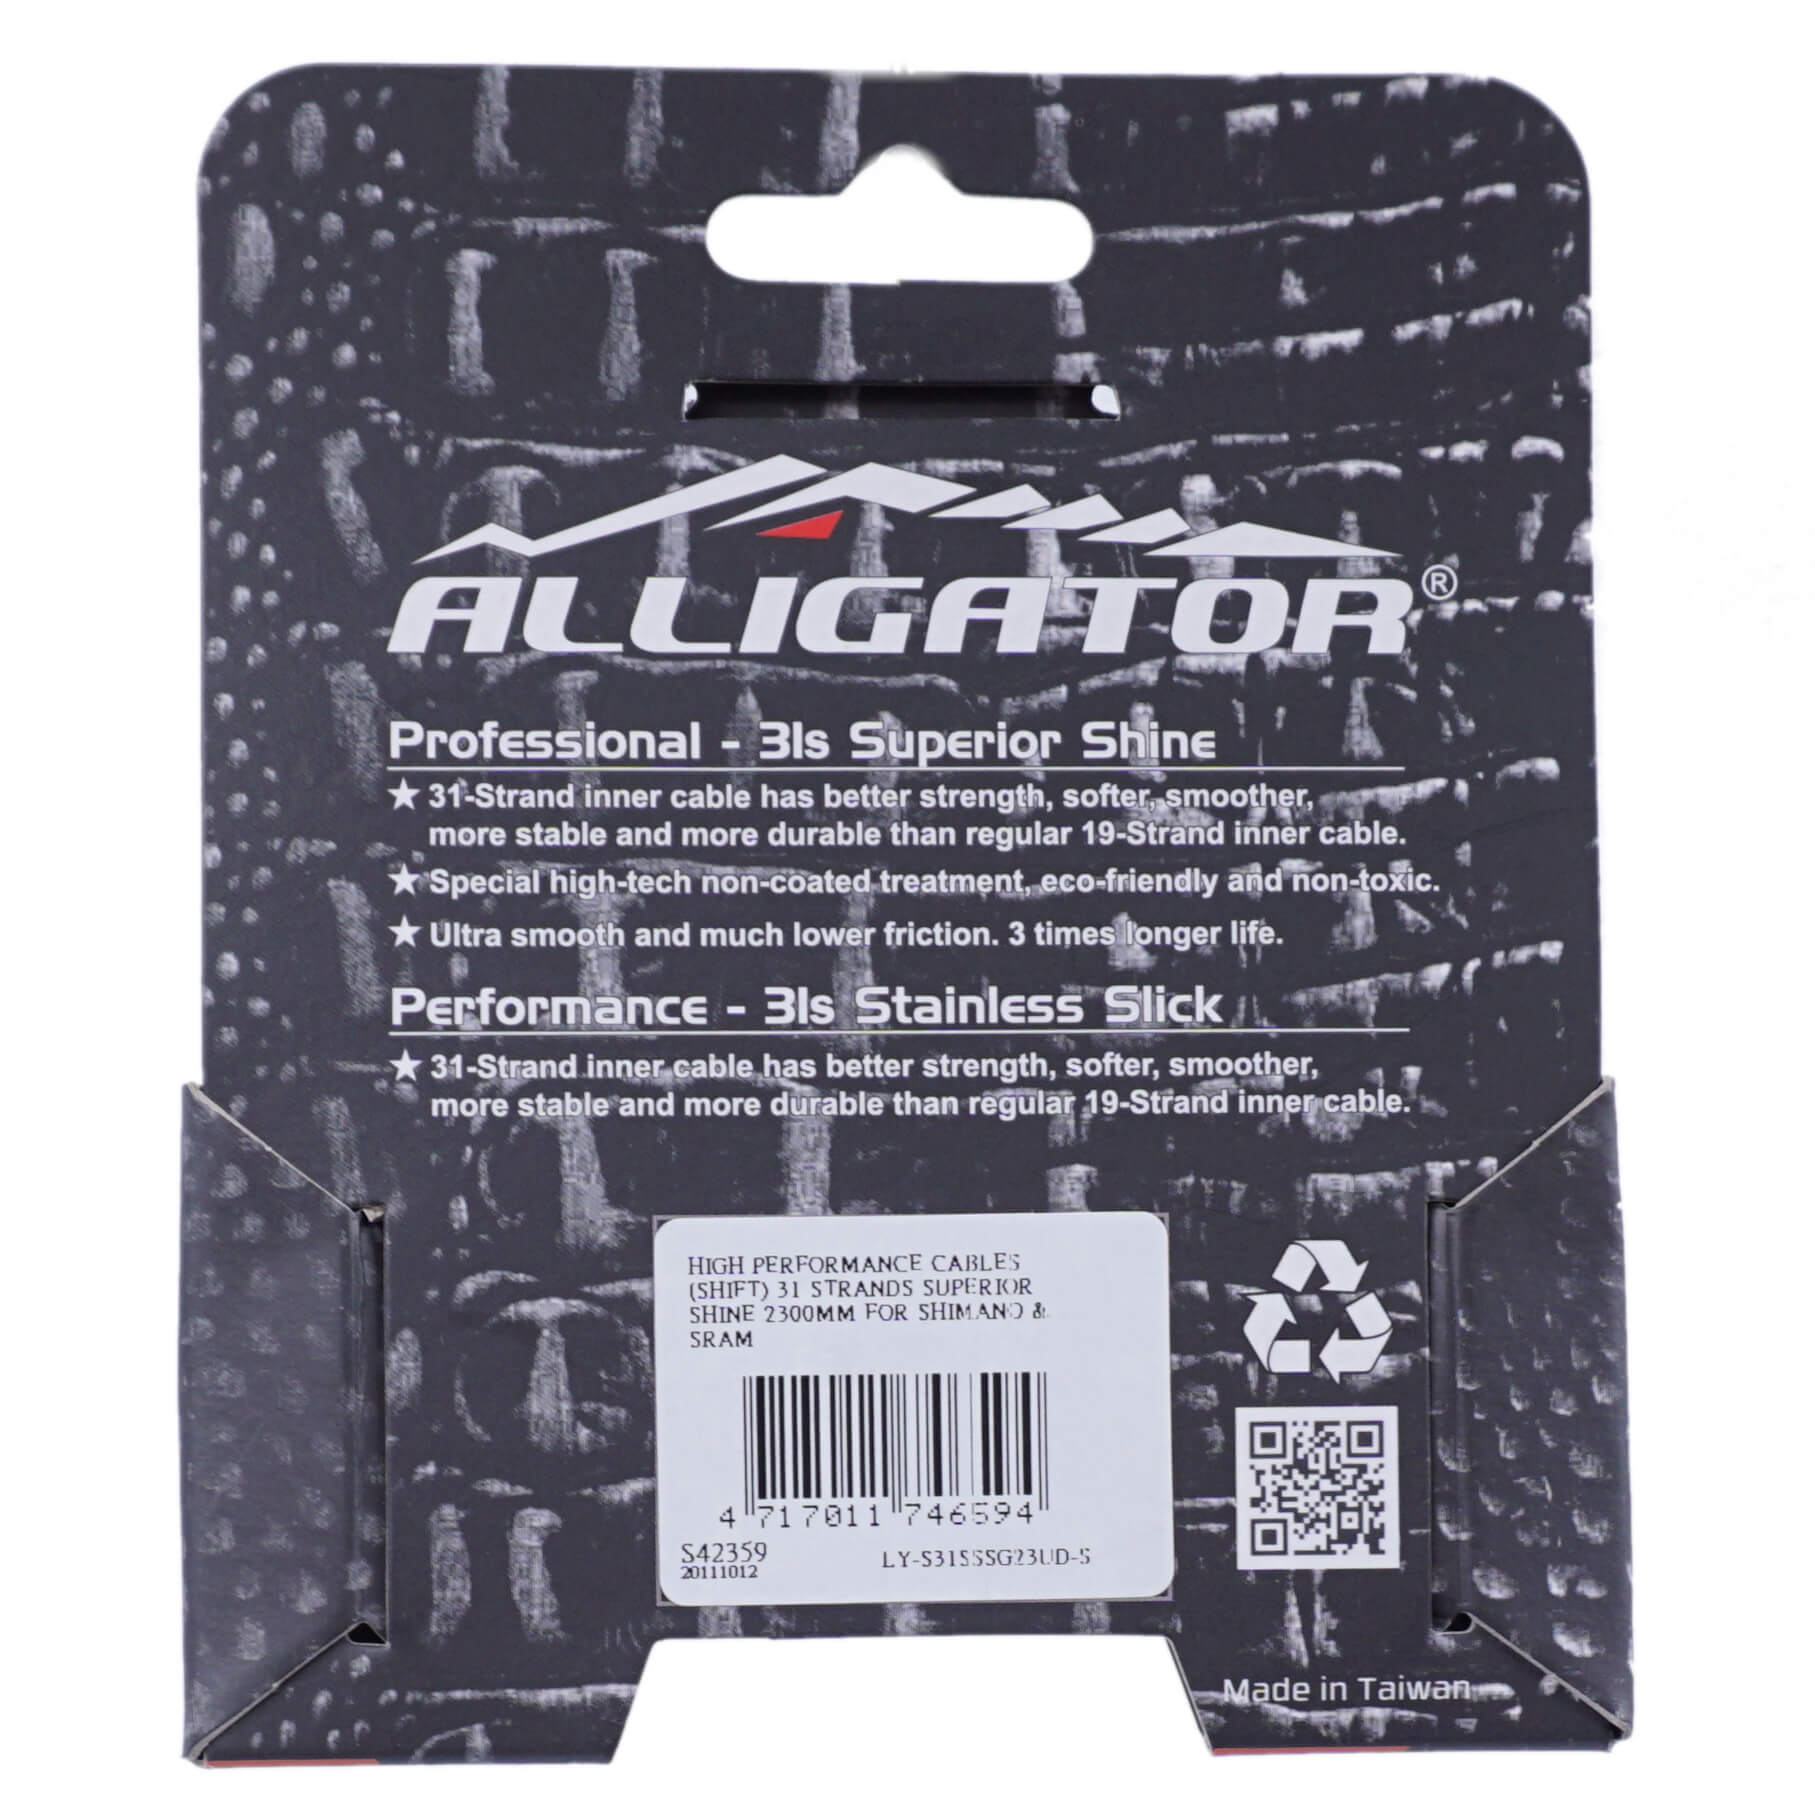 Alligator Shift Cable 31-Strand Stainless Steel